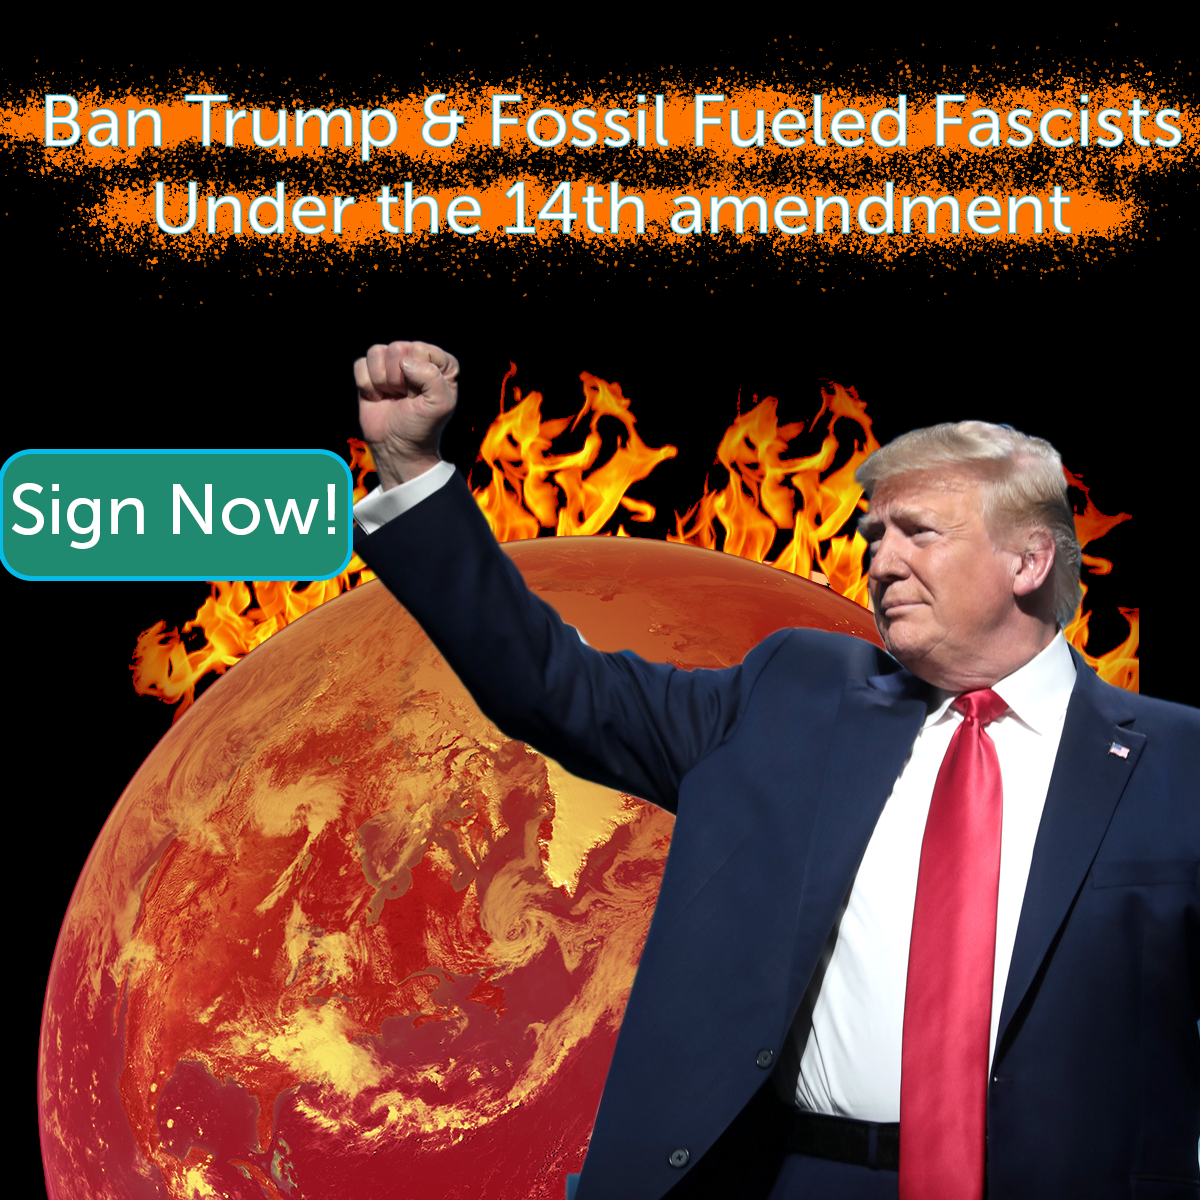 Ban Trump and fossil fueled fascists under the 14th amendment, sign now